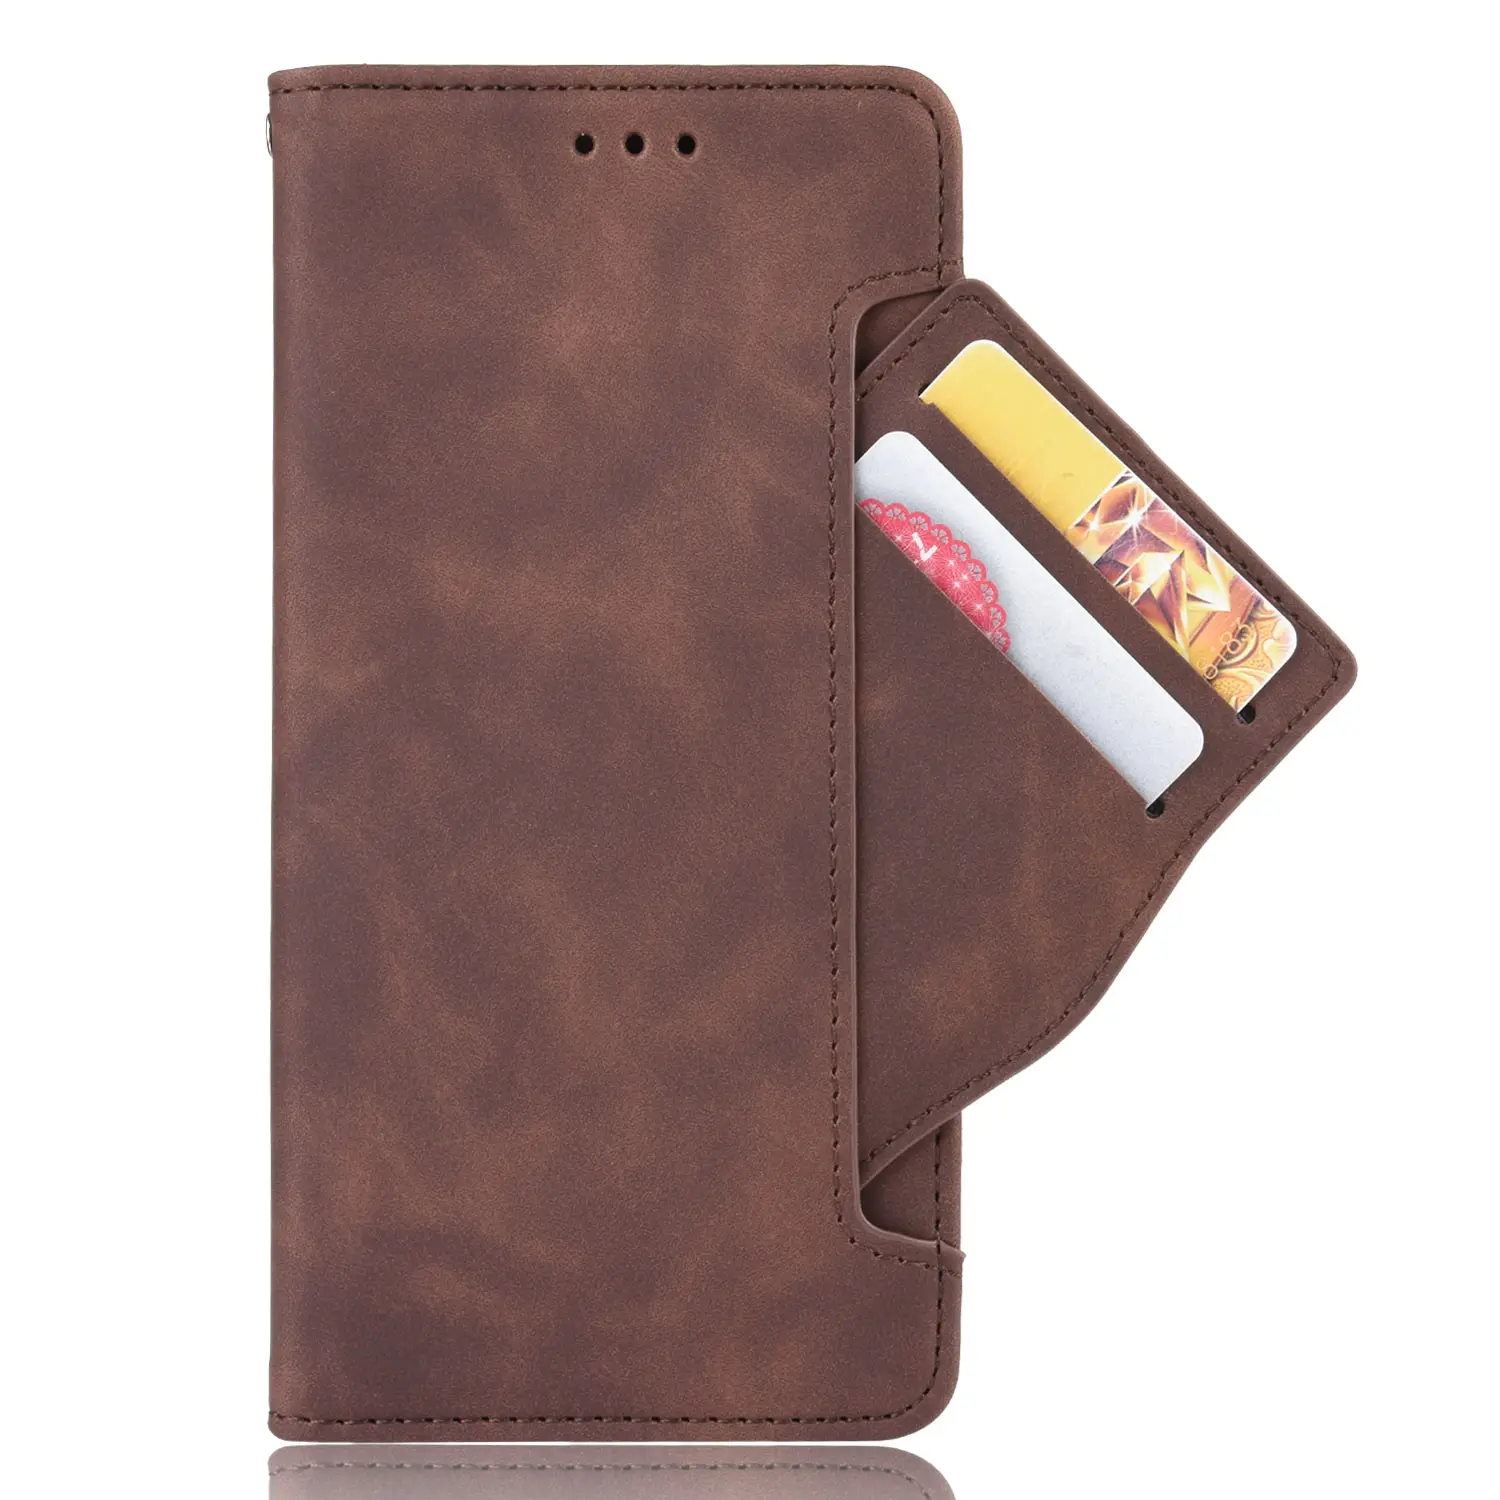 Multi Function Multi Card Slot Detachable Wallet Leather Phone Case For Asus ROG Phone 2 /S660KL